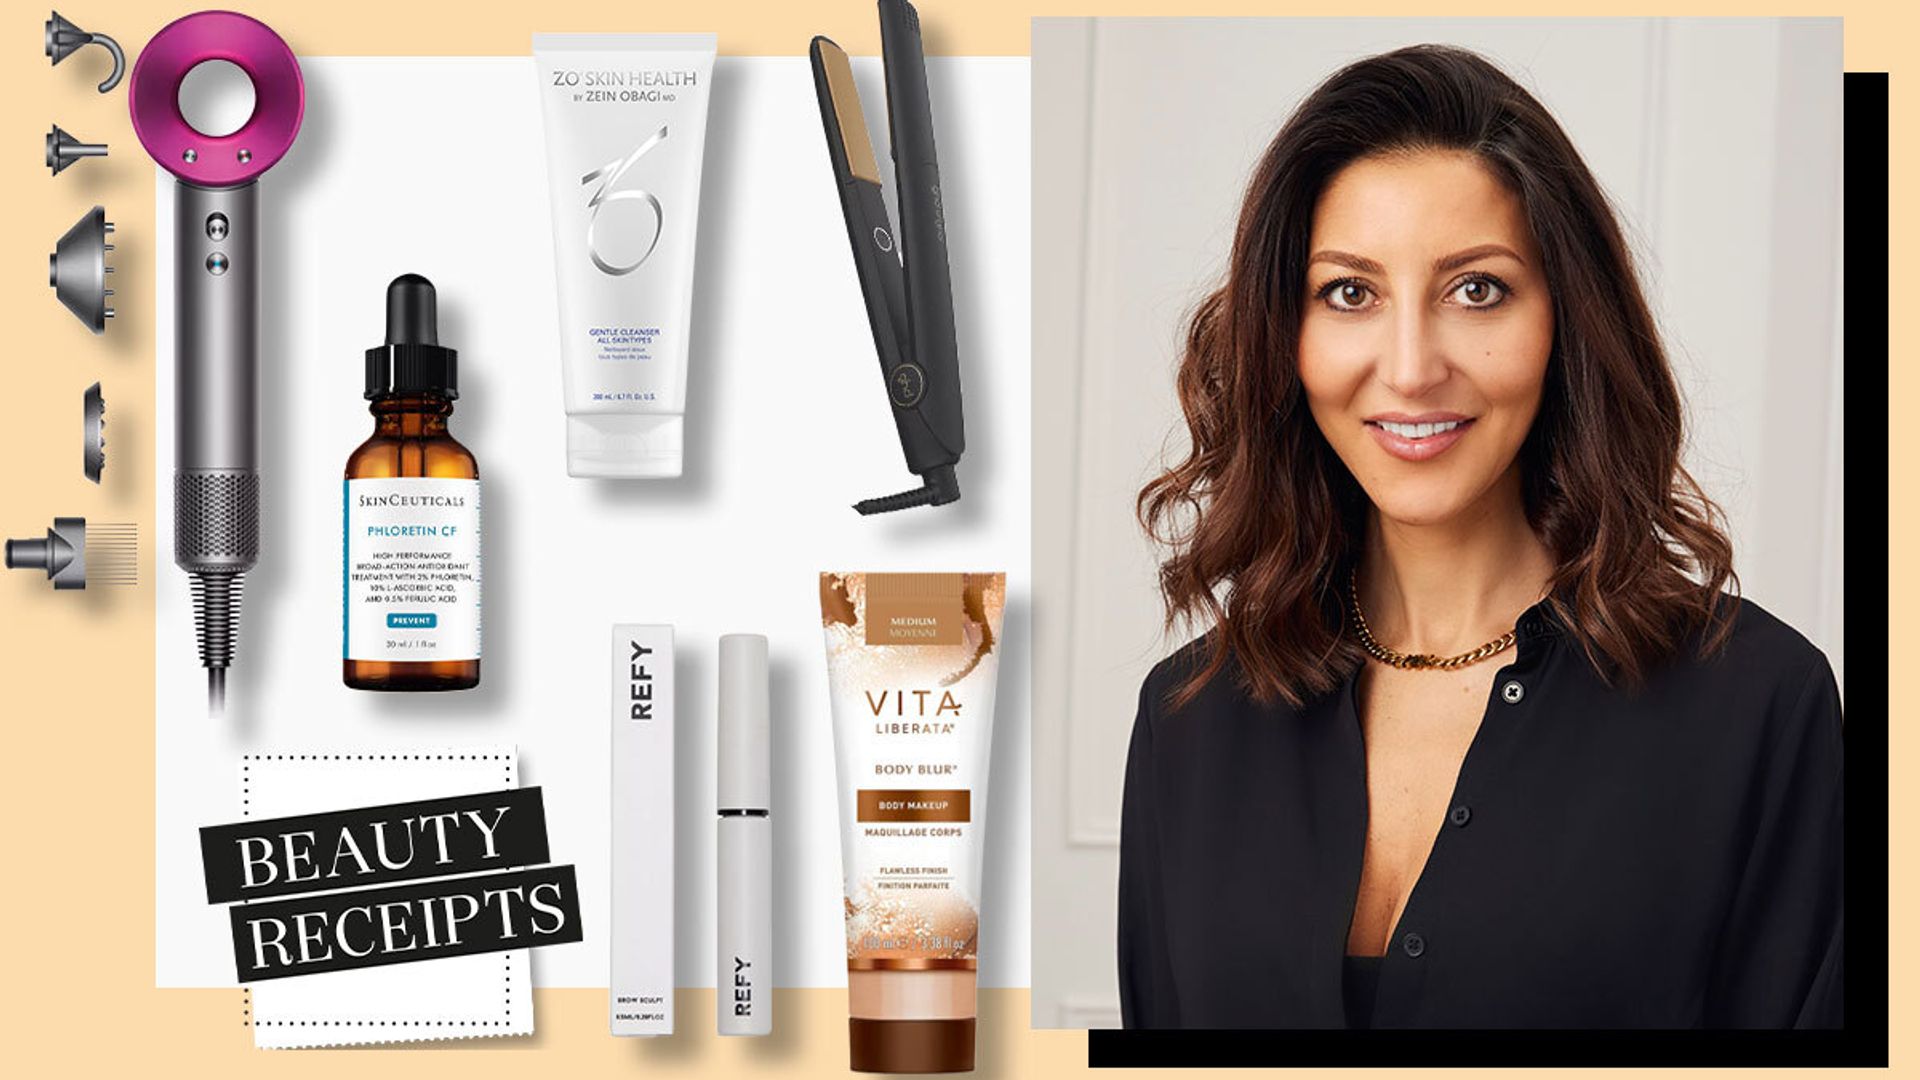 Beauty Receipts: What fashion designer Nadine Merabi's monthly beauty routine looks like